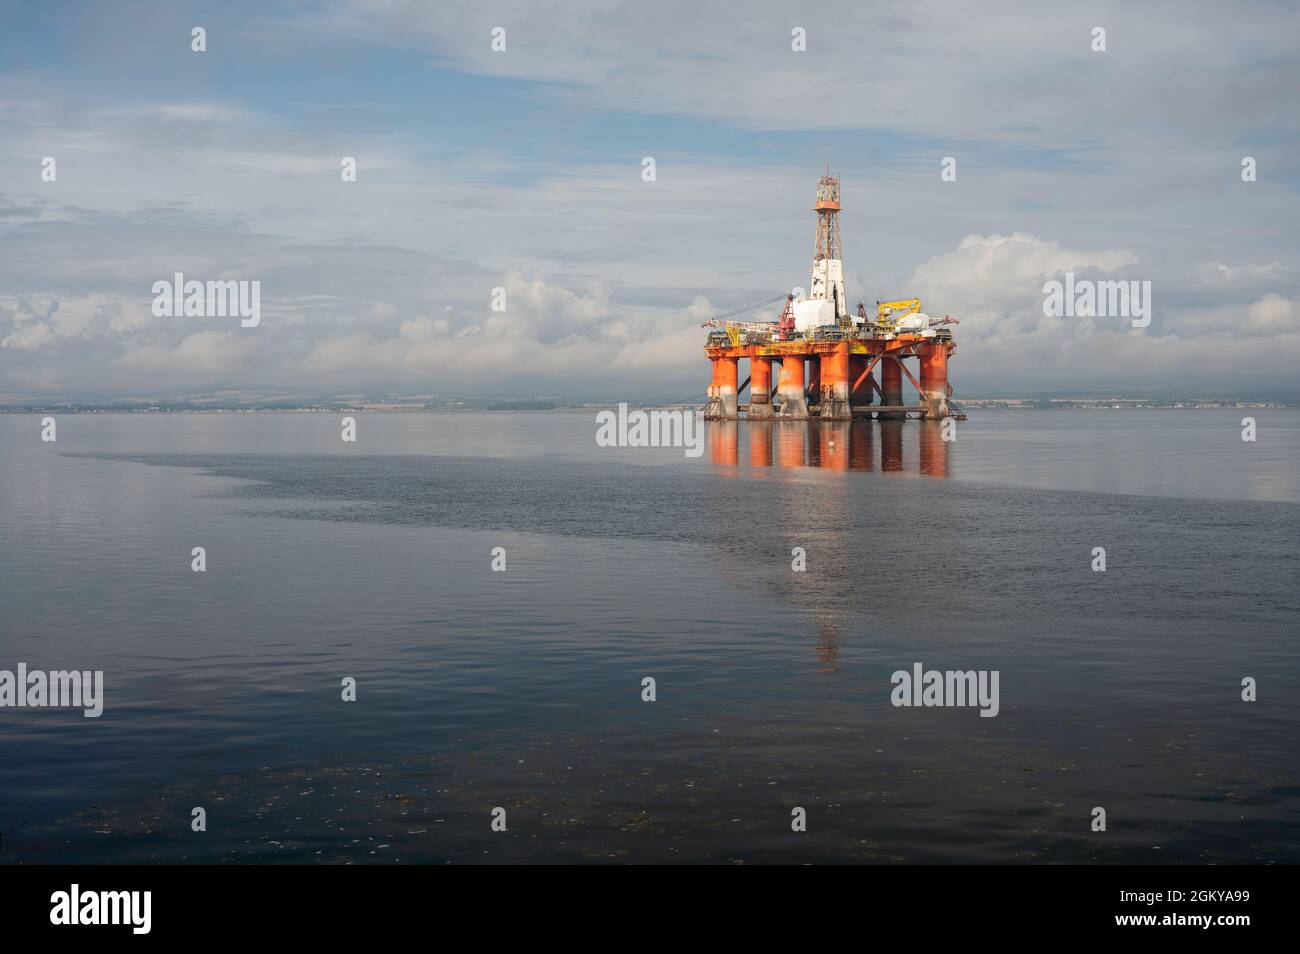 Floating orange and white oil rig in the Cromarty Firth. Sunny day with blue sky and clouds, no people. Lots of copy space. Stock Photo